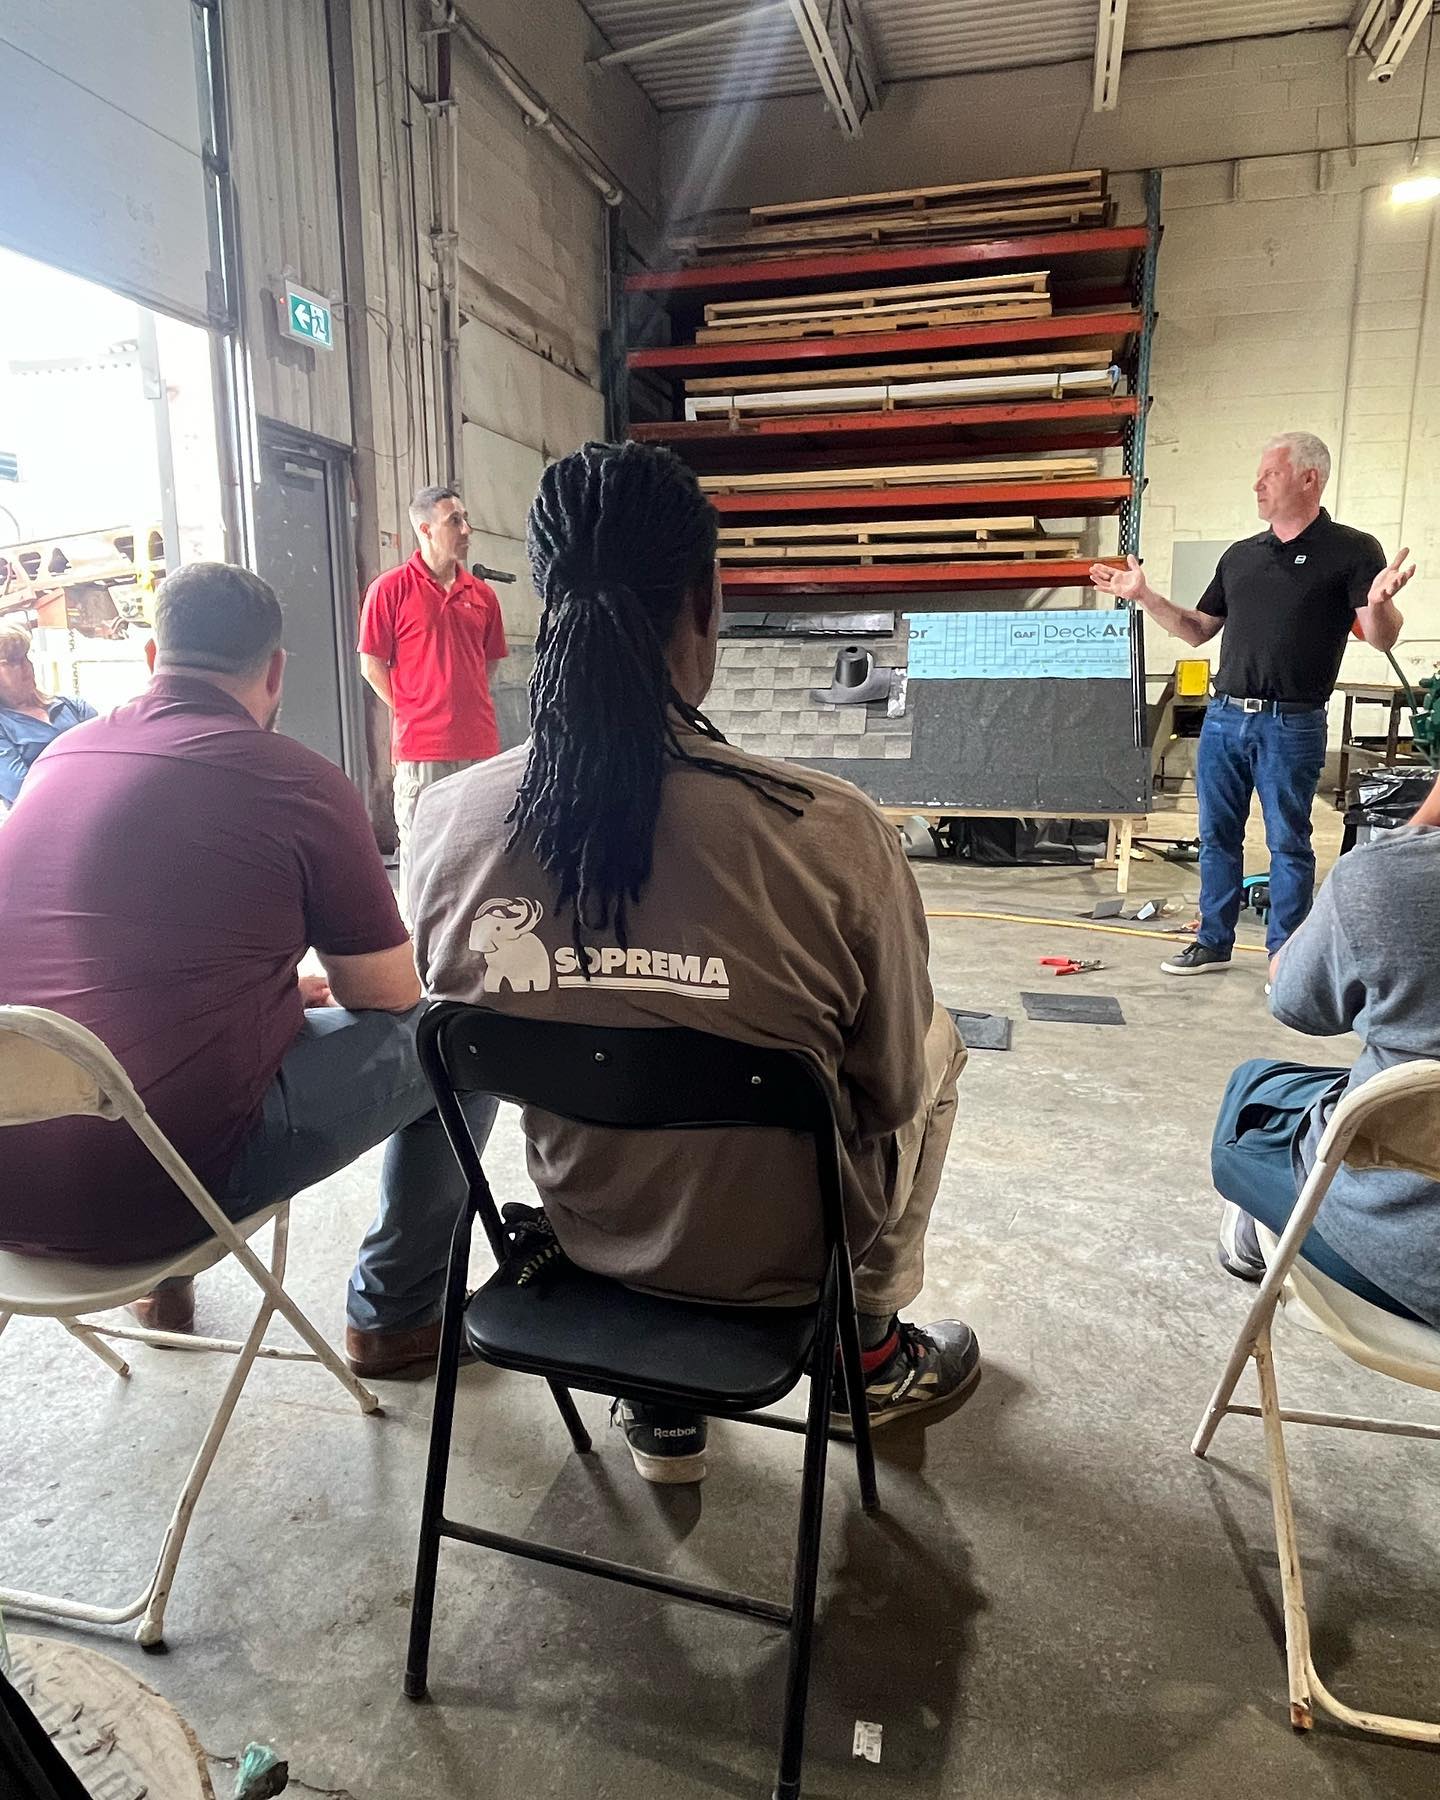 Productive rain day with @gafroofing CARE hands-on install training today ✏️🎓🏠
.
.
.
#roofingcontractor #shingles #gafmasterelite #guelphbusiness #training